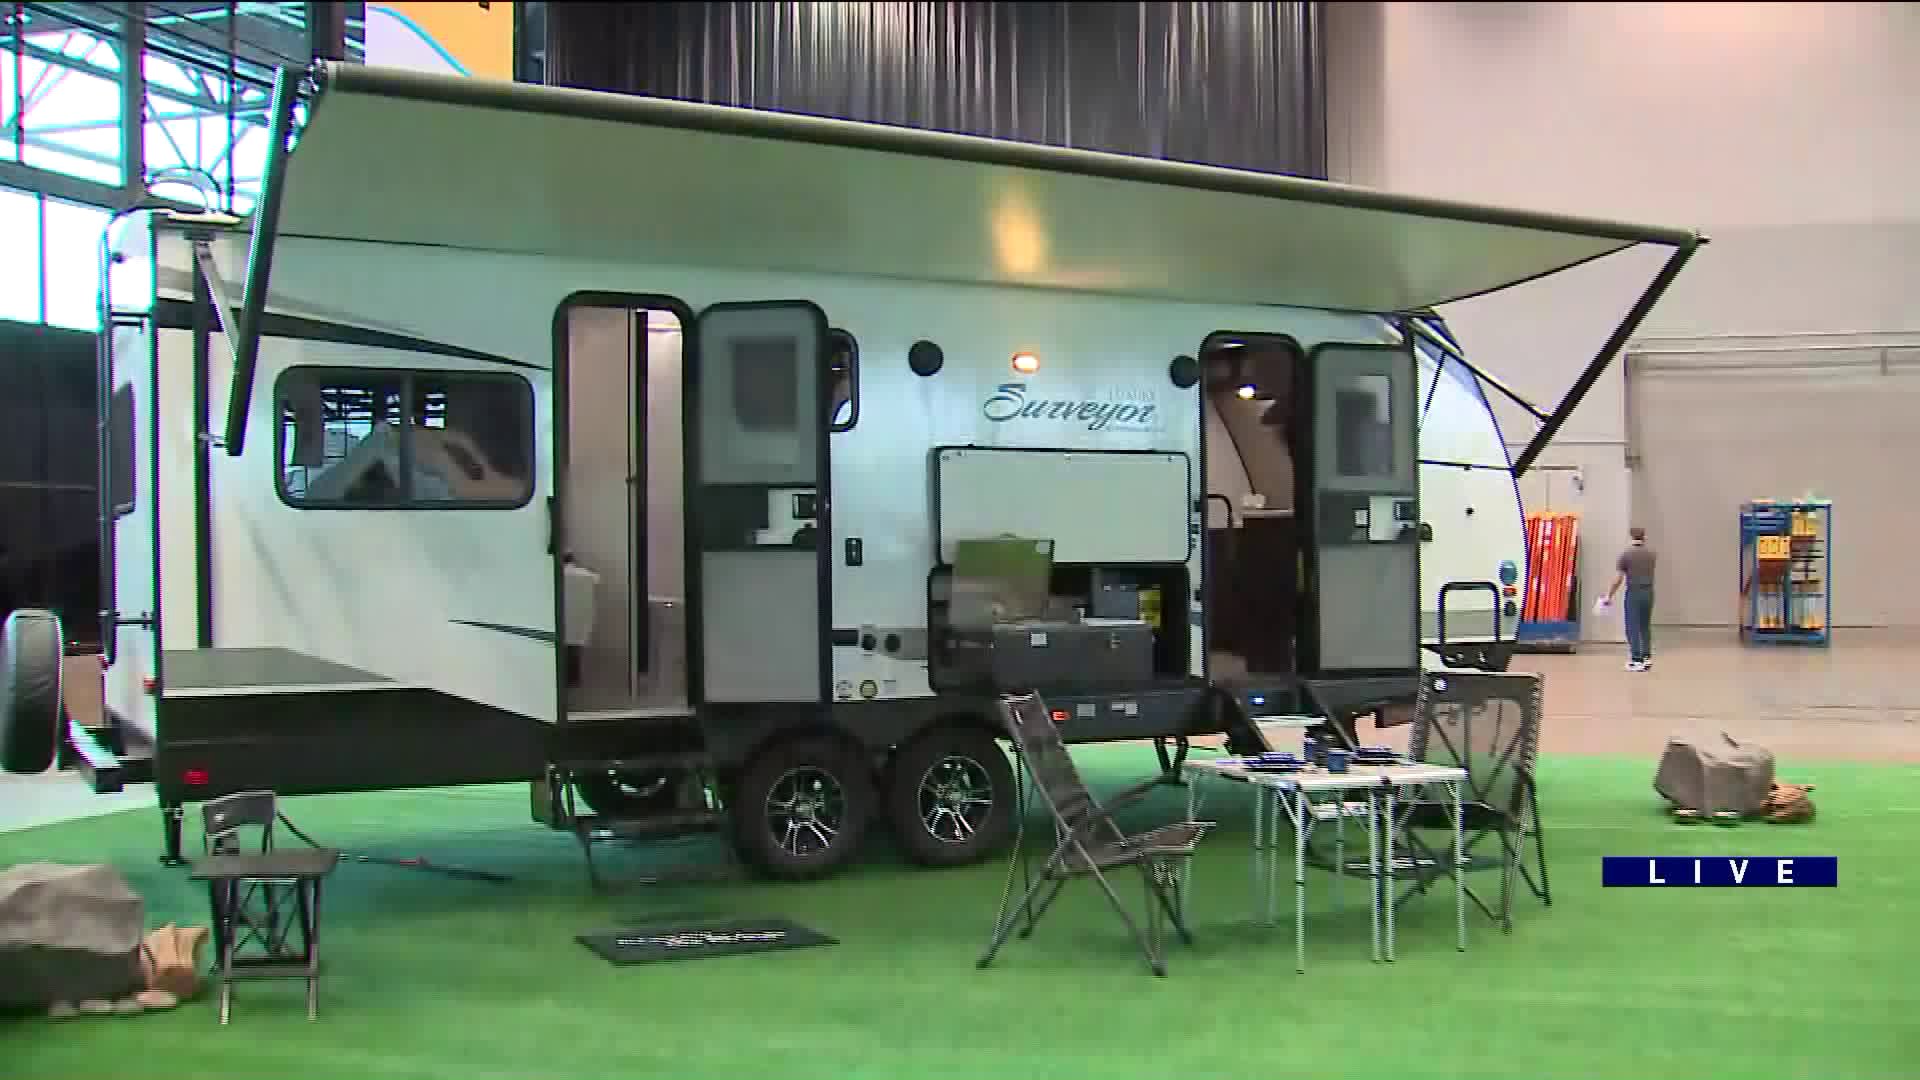 Around Town previews the Outside Experience at McCormick Place